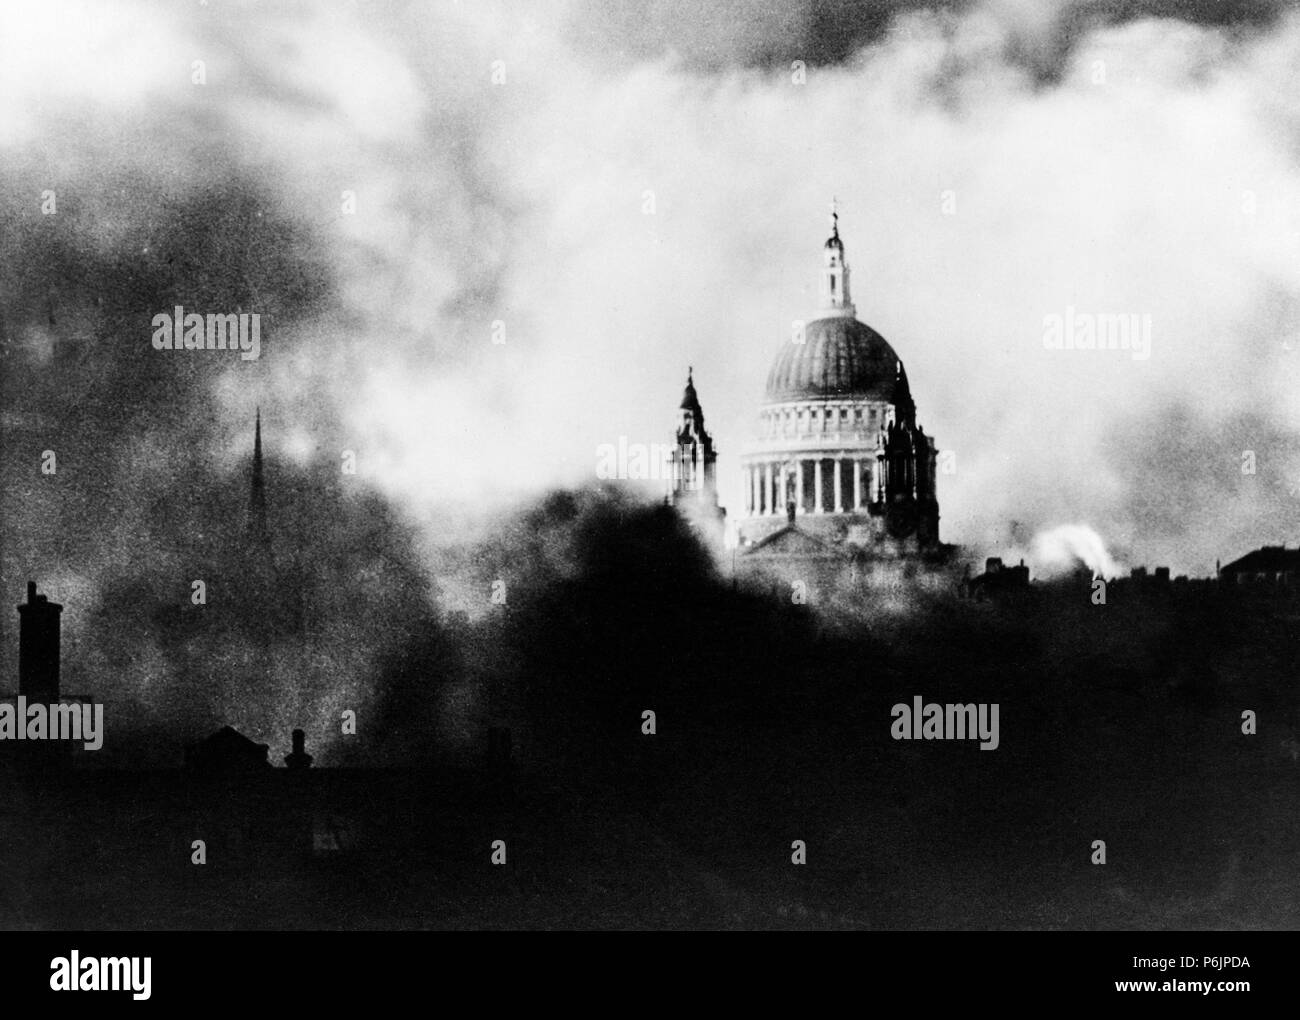 St. Paul's cathedral in London, surrounded by smoke and fires during the blitz by the German Luftwaffe in World War II in 1940. Stock Photo